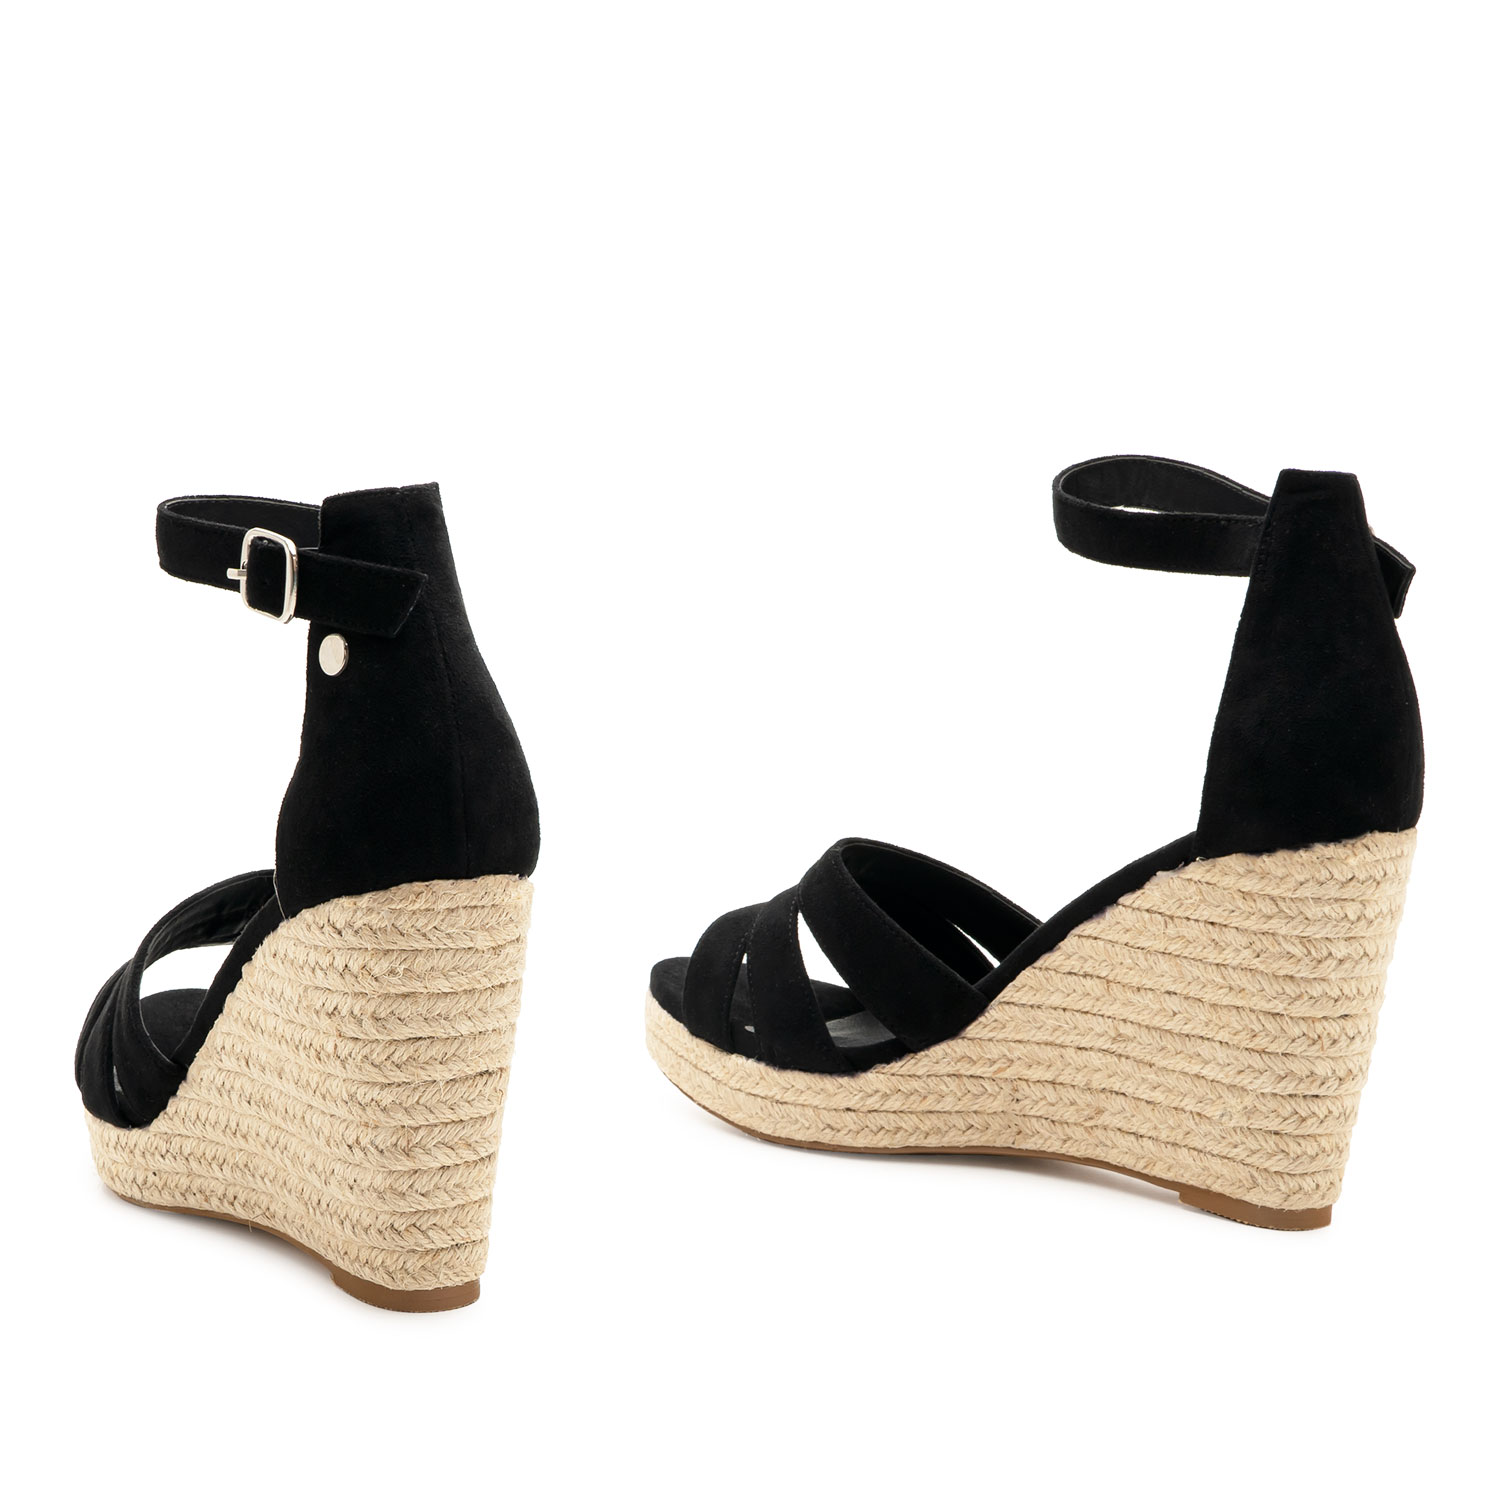 Black Faux Suede Espadrilles with Jute Wedge 